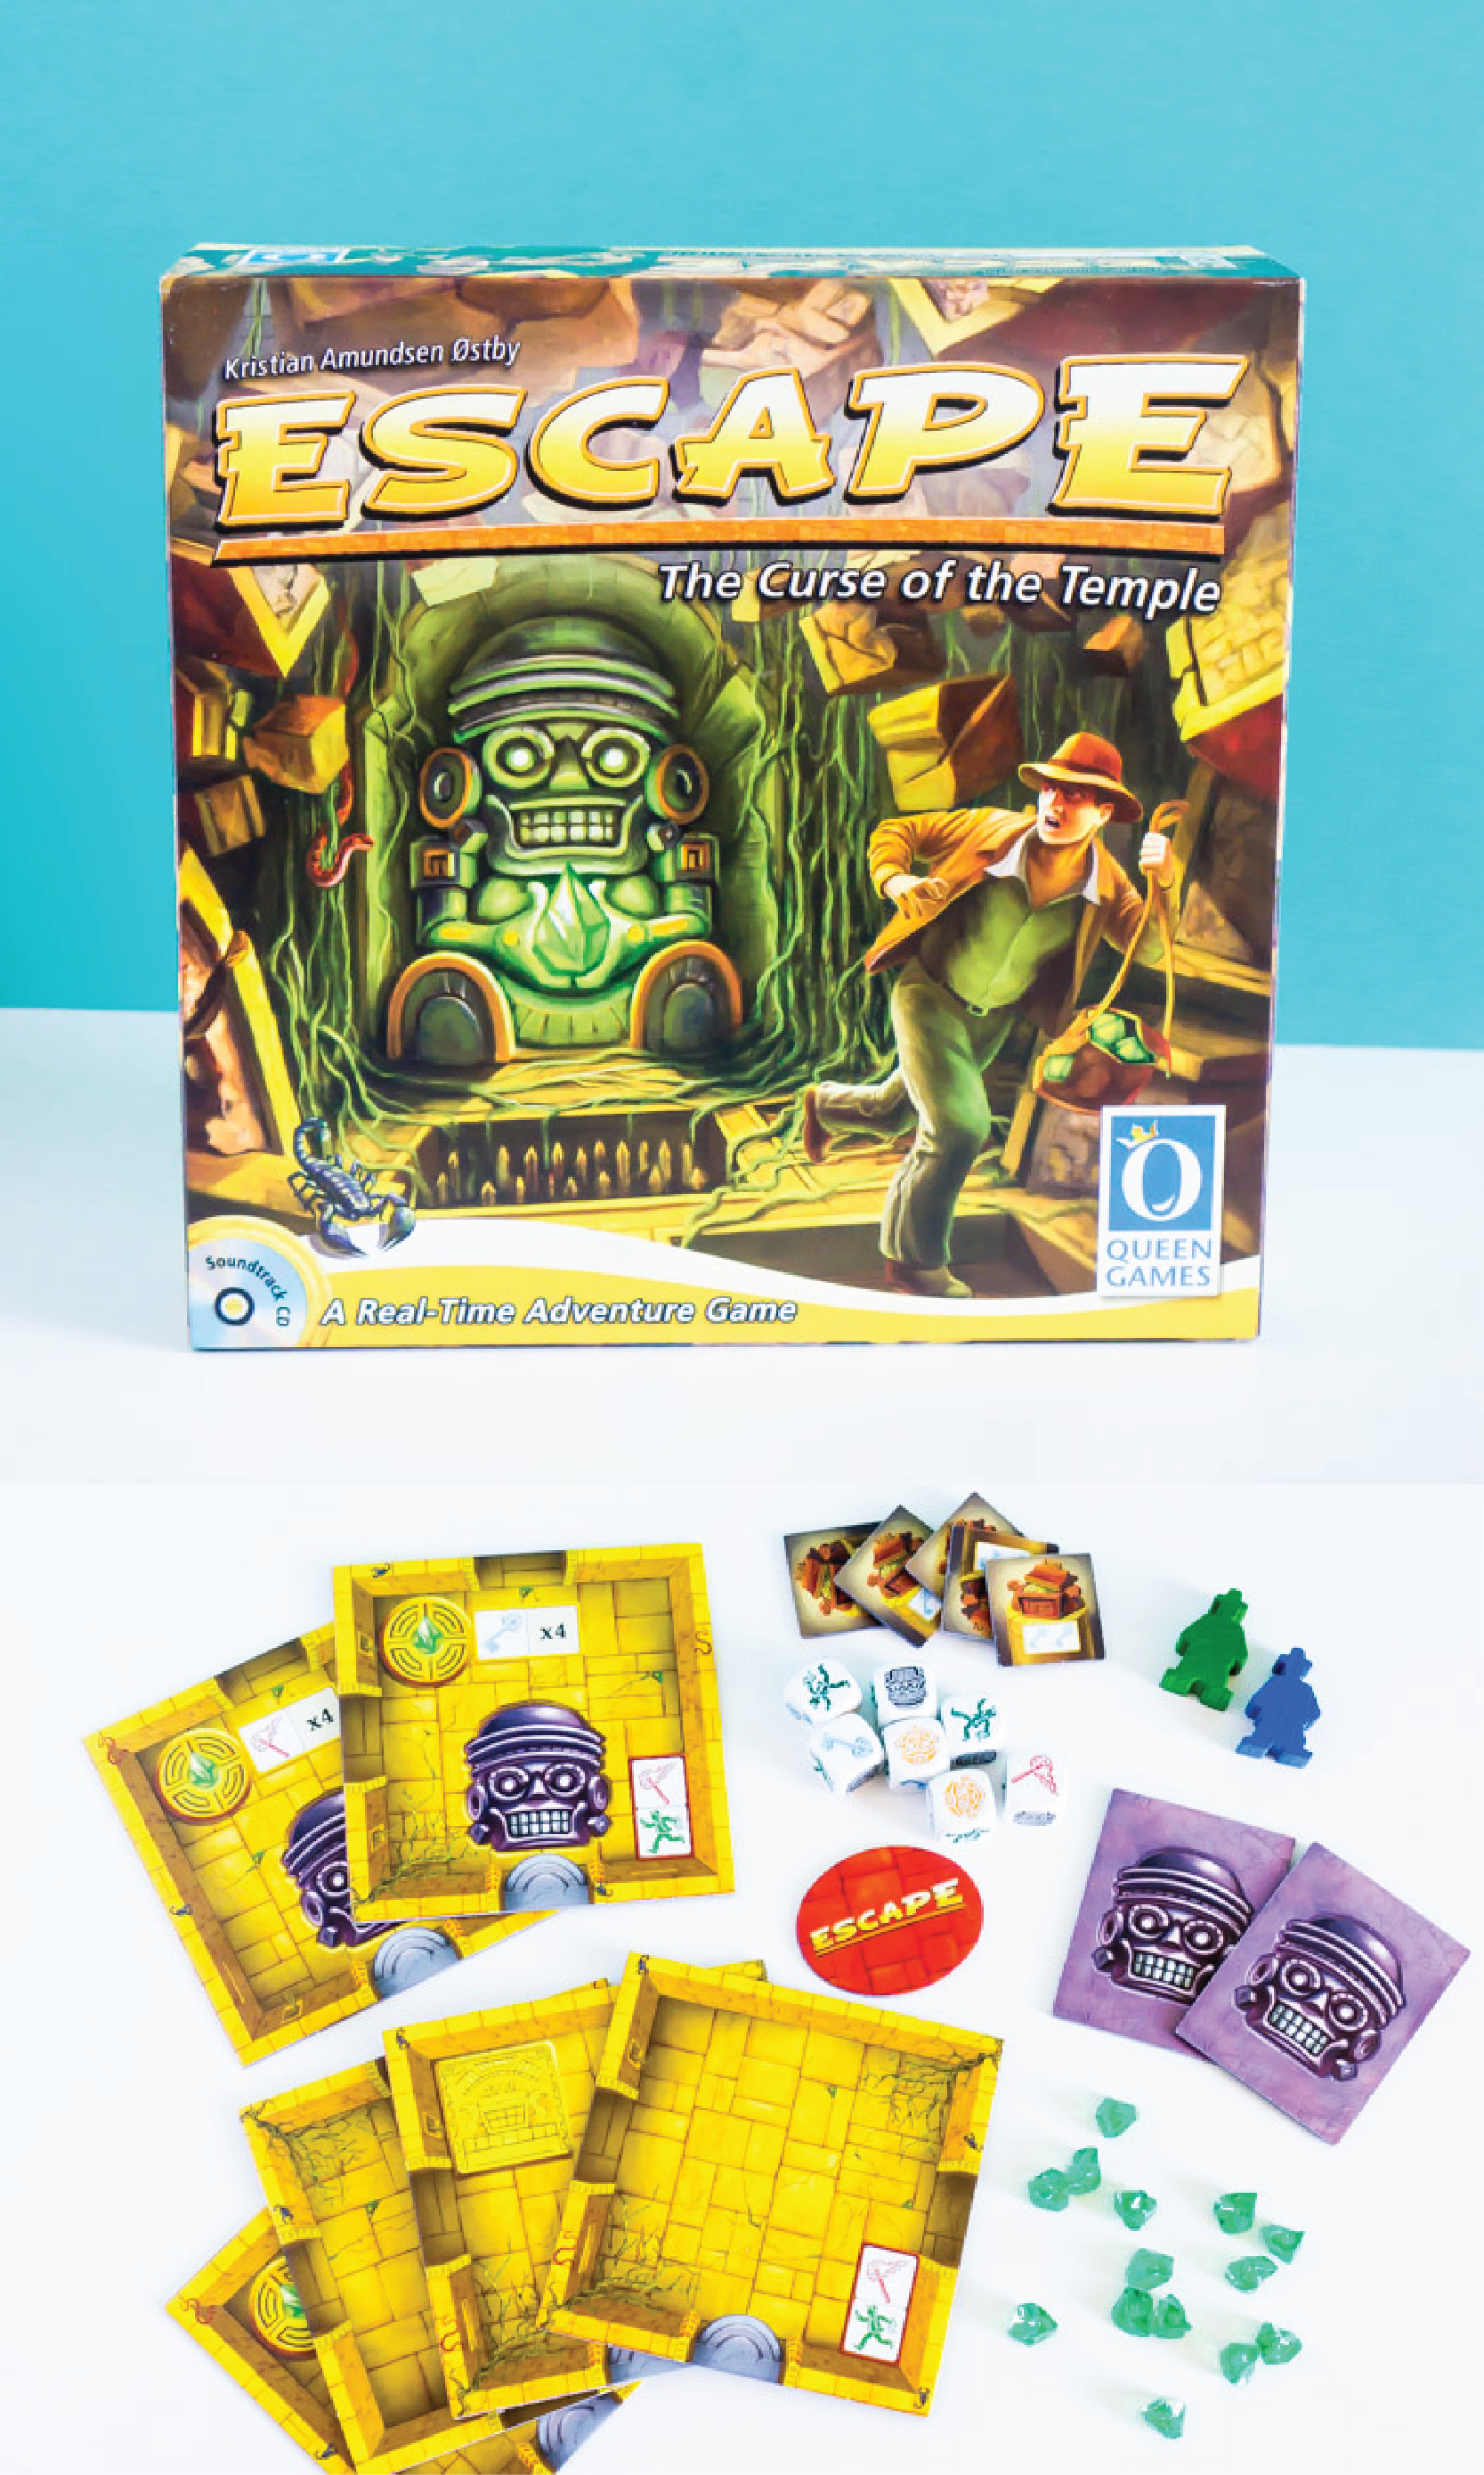 Escape is one of the most fun cooperate adult board games